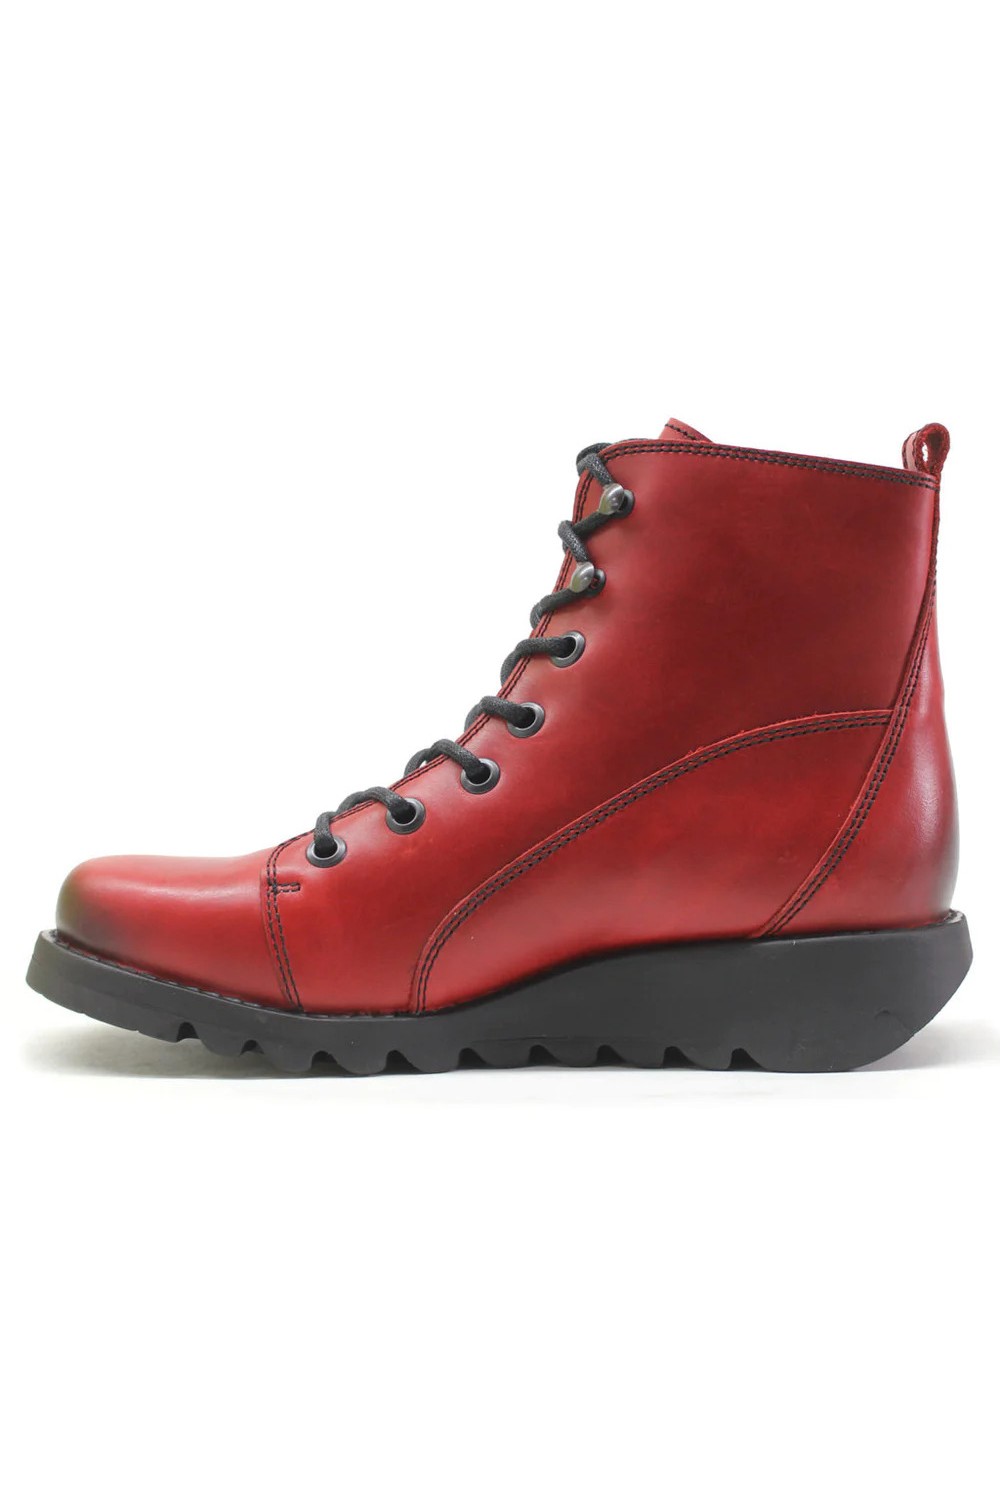 FLY LONDON Sore813 Lace Up Boots Red (Black Soles).